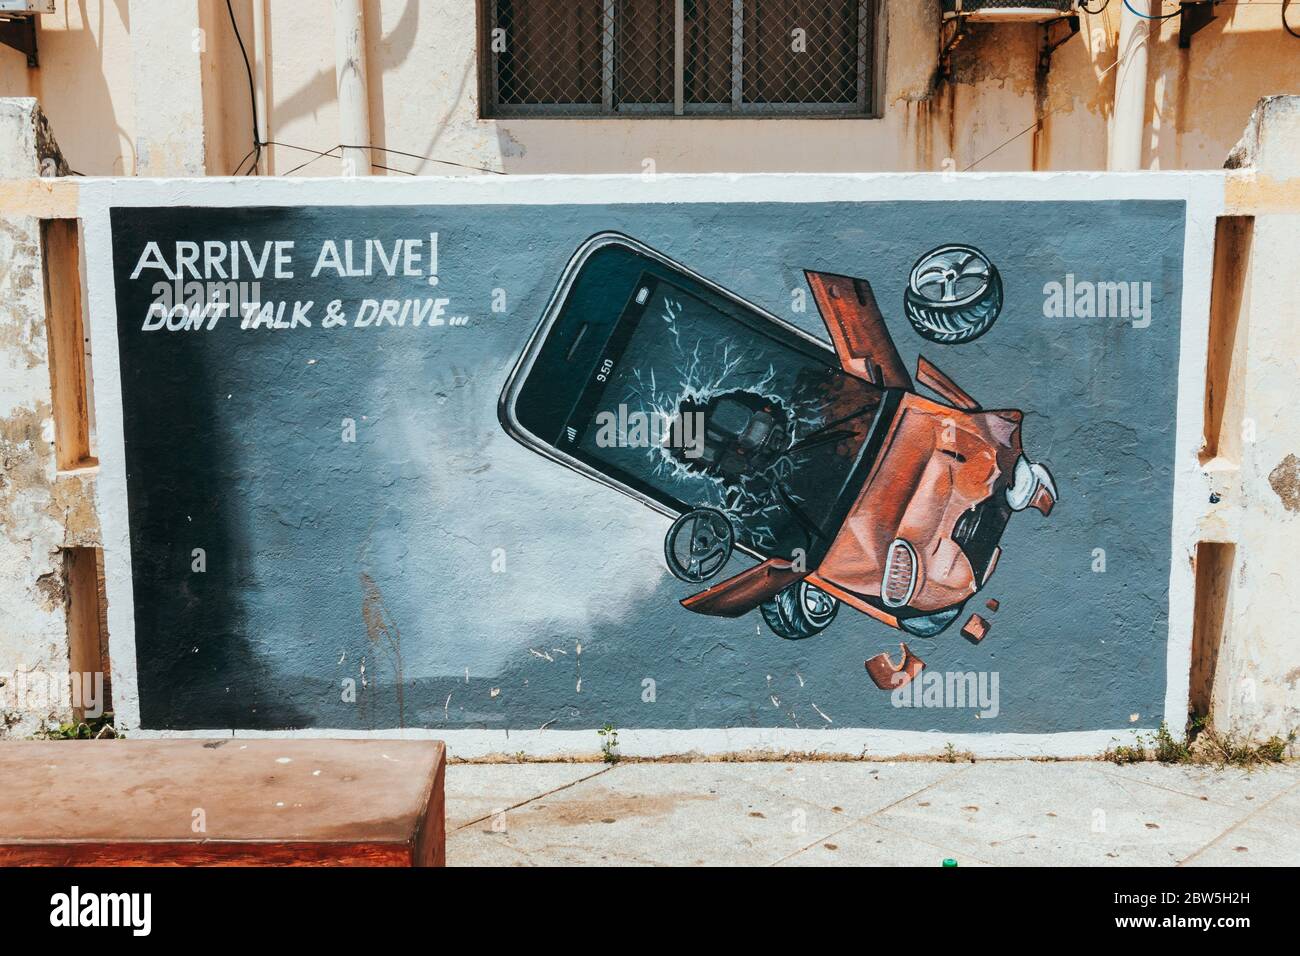 'Arrive alive! Don't talk & drive' - a hand-painted safe driving advertisement in Pondicherry, India, depicting a mobile phone smashed into a vehicle Stock Photo